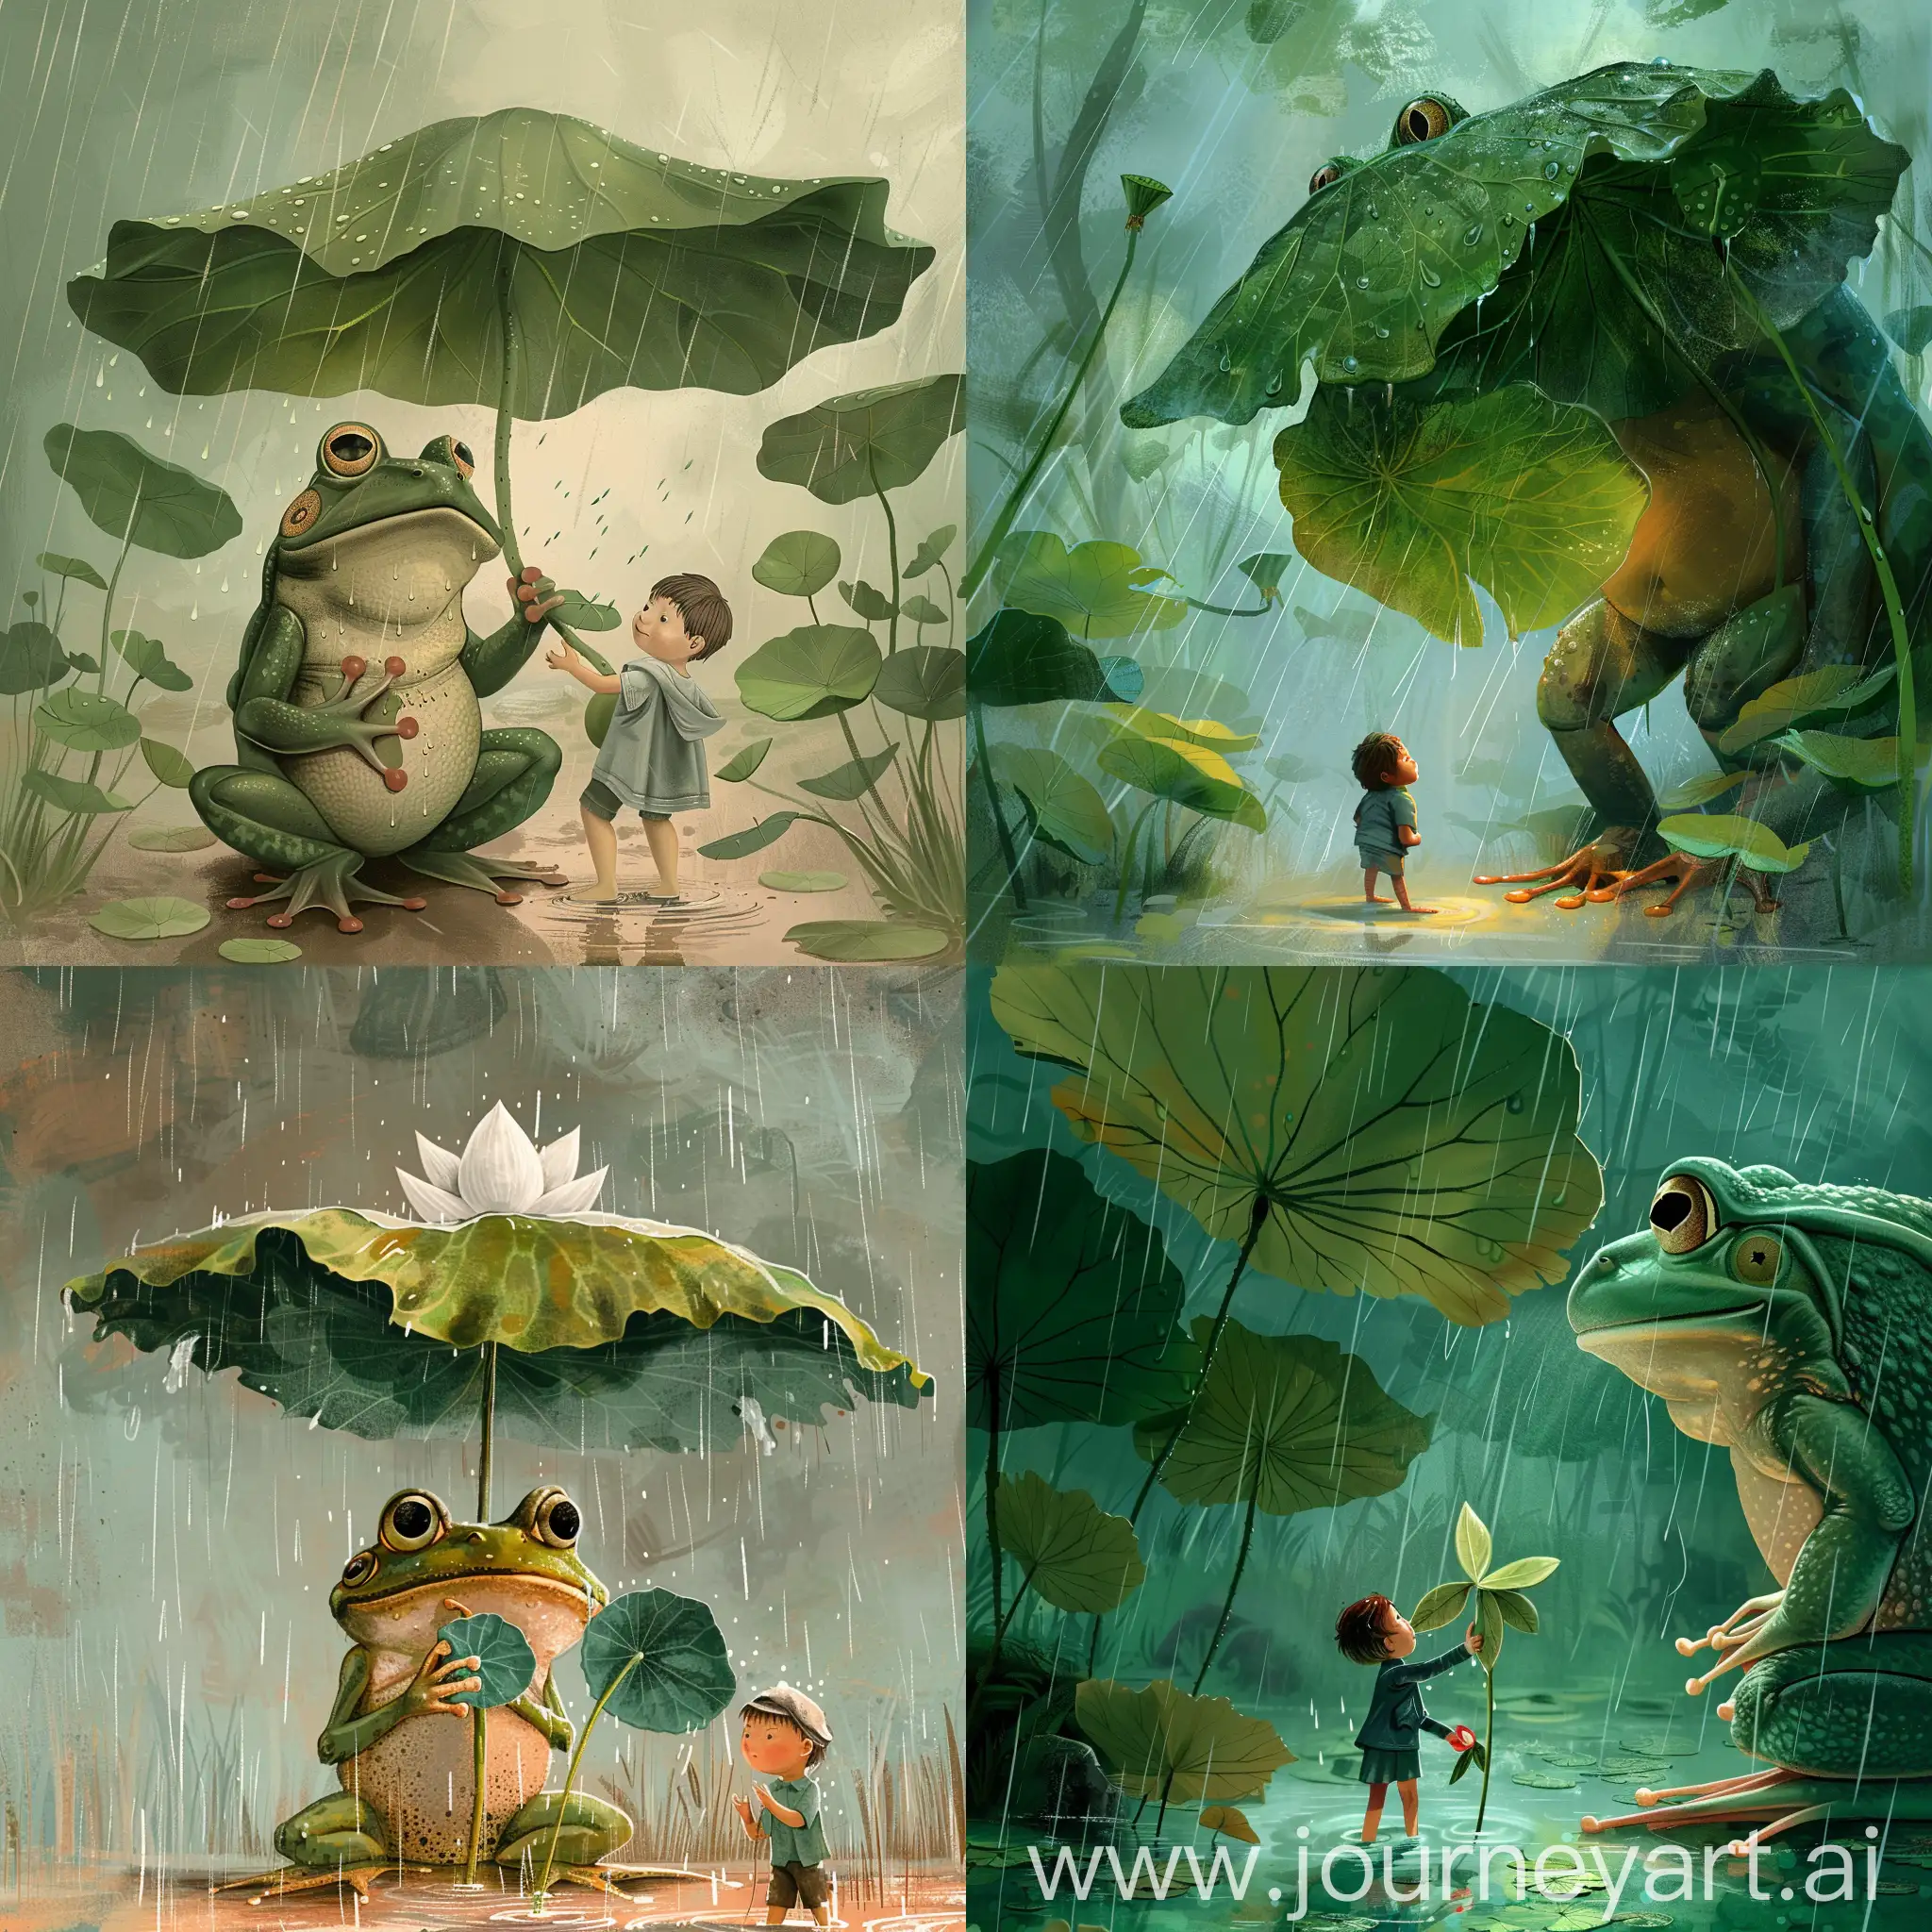 Gentle-Frog-Sheltering-Young-Boy-with-Lotus-Leaves-Healing-Illustration